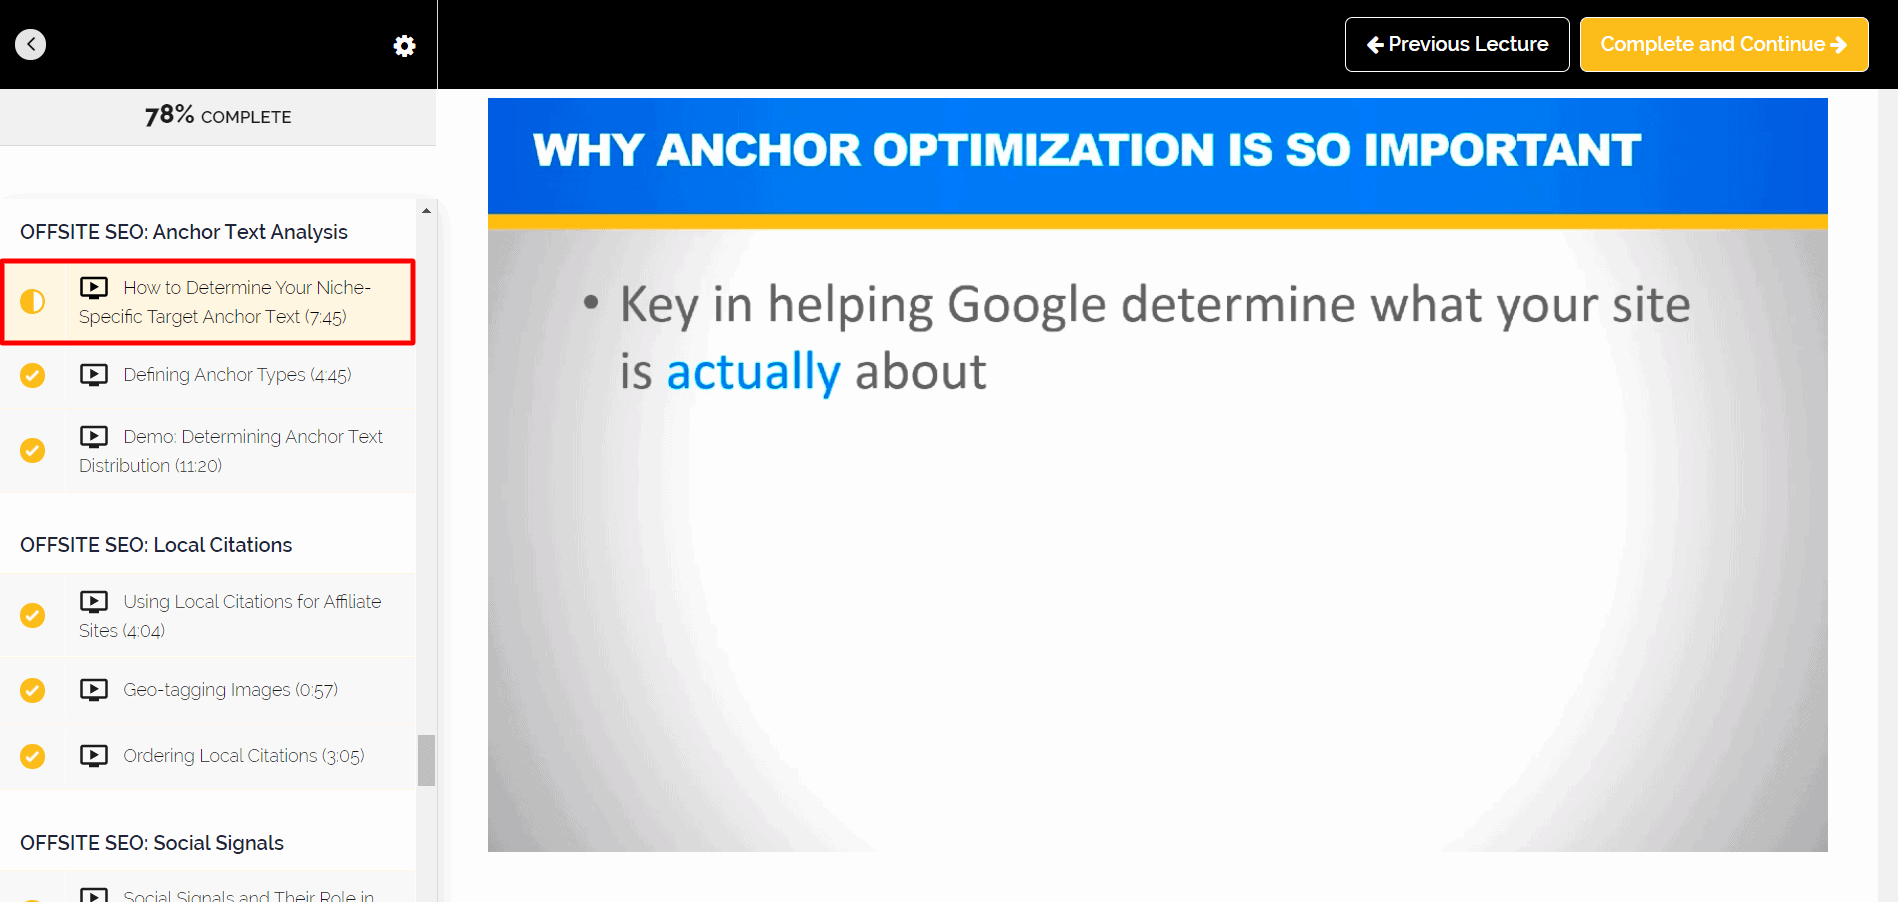 How to Determine Your Niche-Specific Target Anchor Text